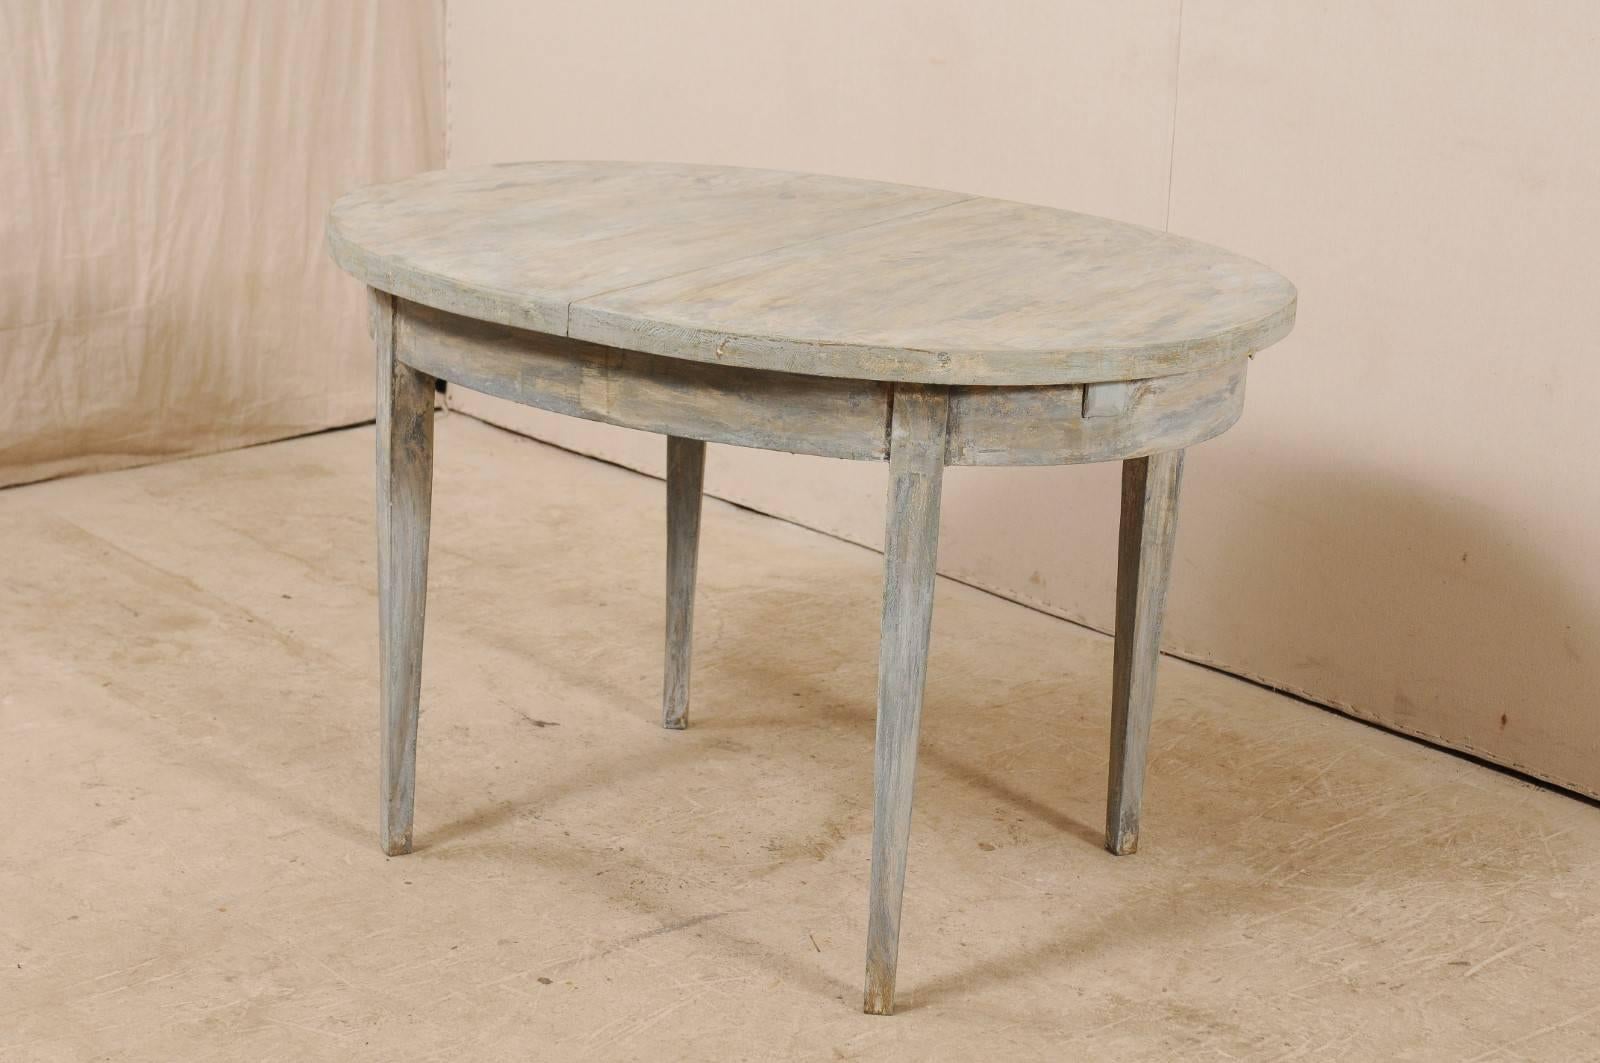 A Swedish midcentury painted wood table. This vintage table from Sweden is designed with simple, clean lines. The table has an oval-shaped top with plain skirt, and is raised upon four gently tapered squared legs. This table has been painted in